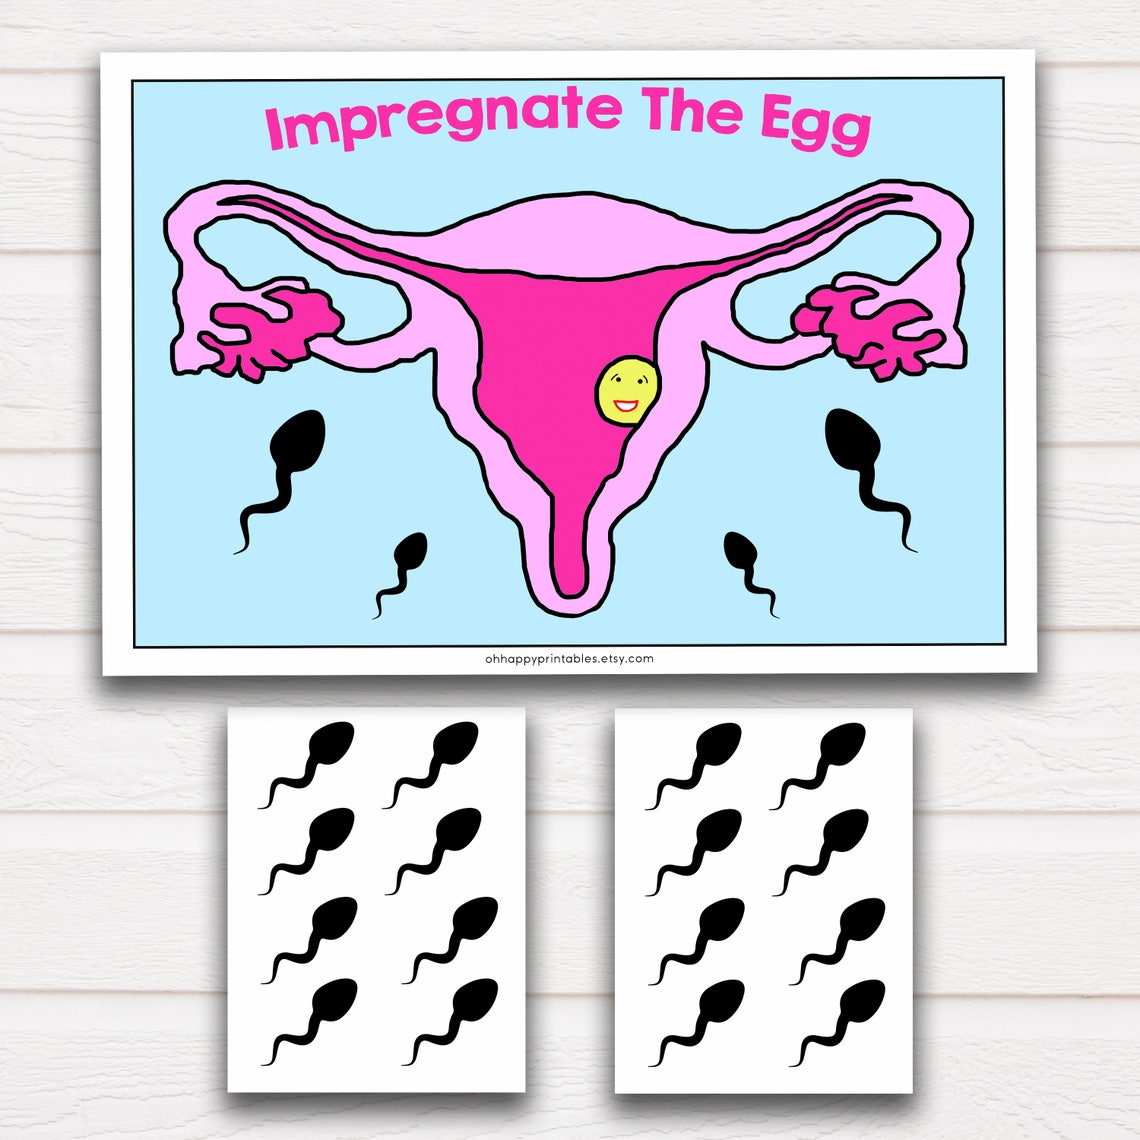 impregnate-the-egg-baby-shower-game-pin-the-sperm-baby-etsy